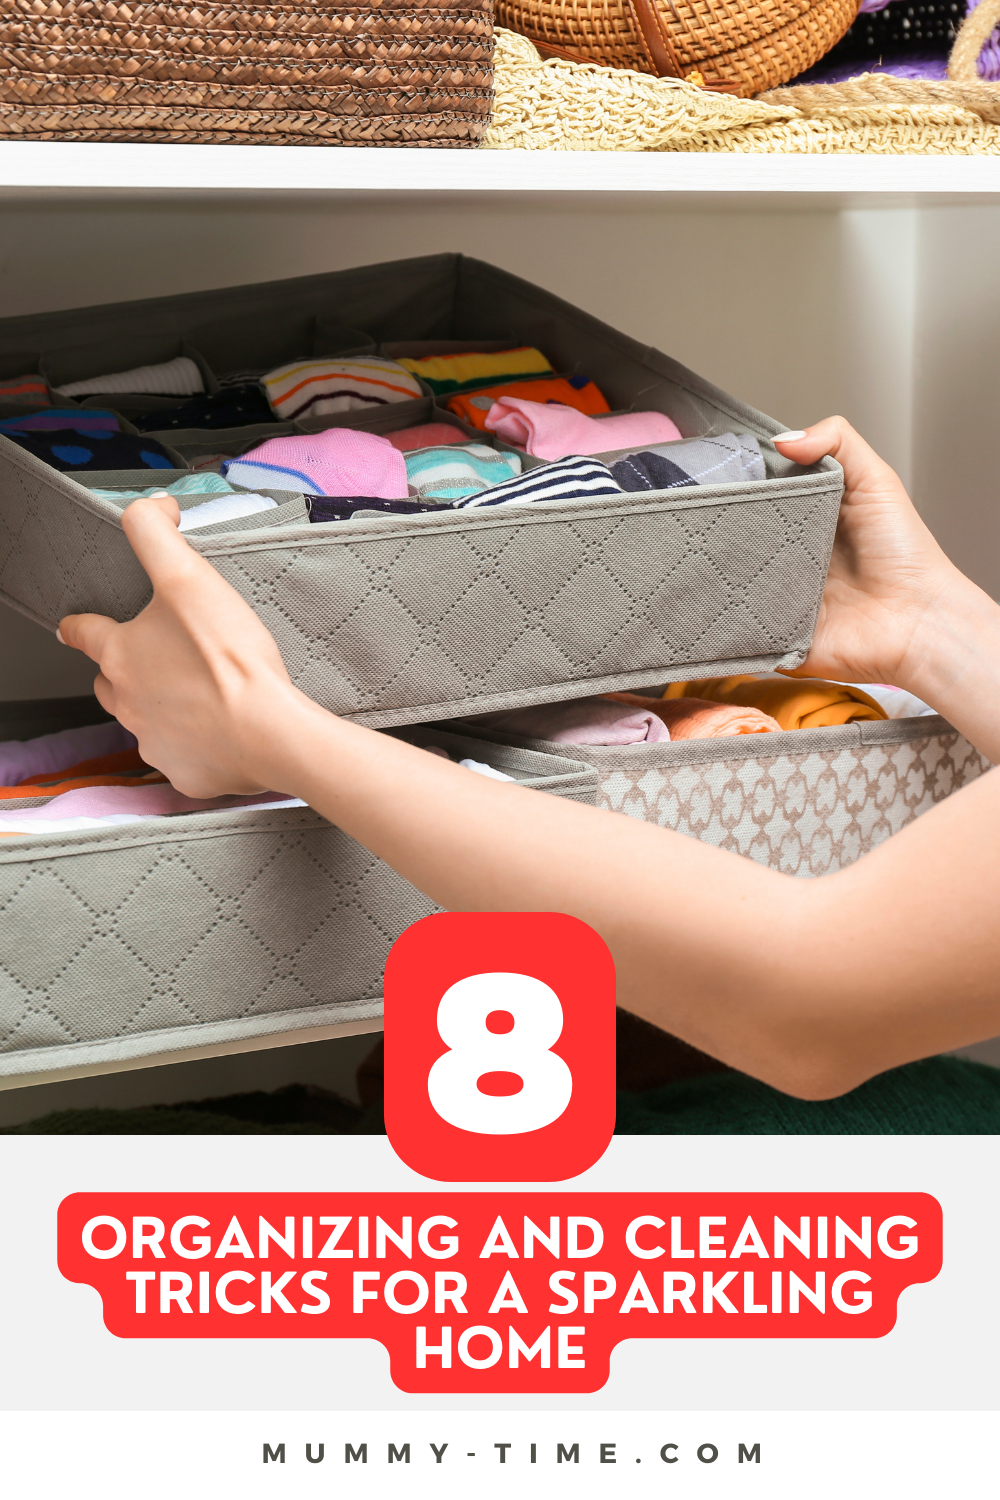 8 Organizing and Cleaning Tricks for a Sparkling Home